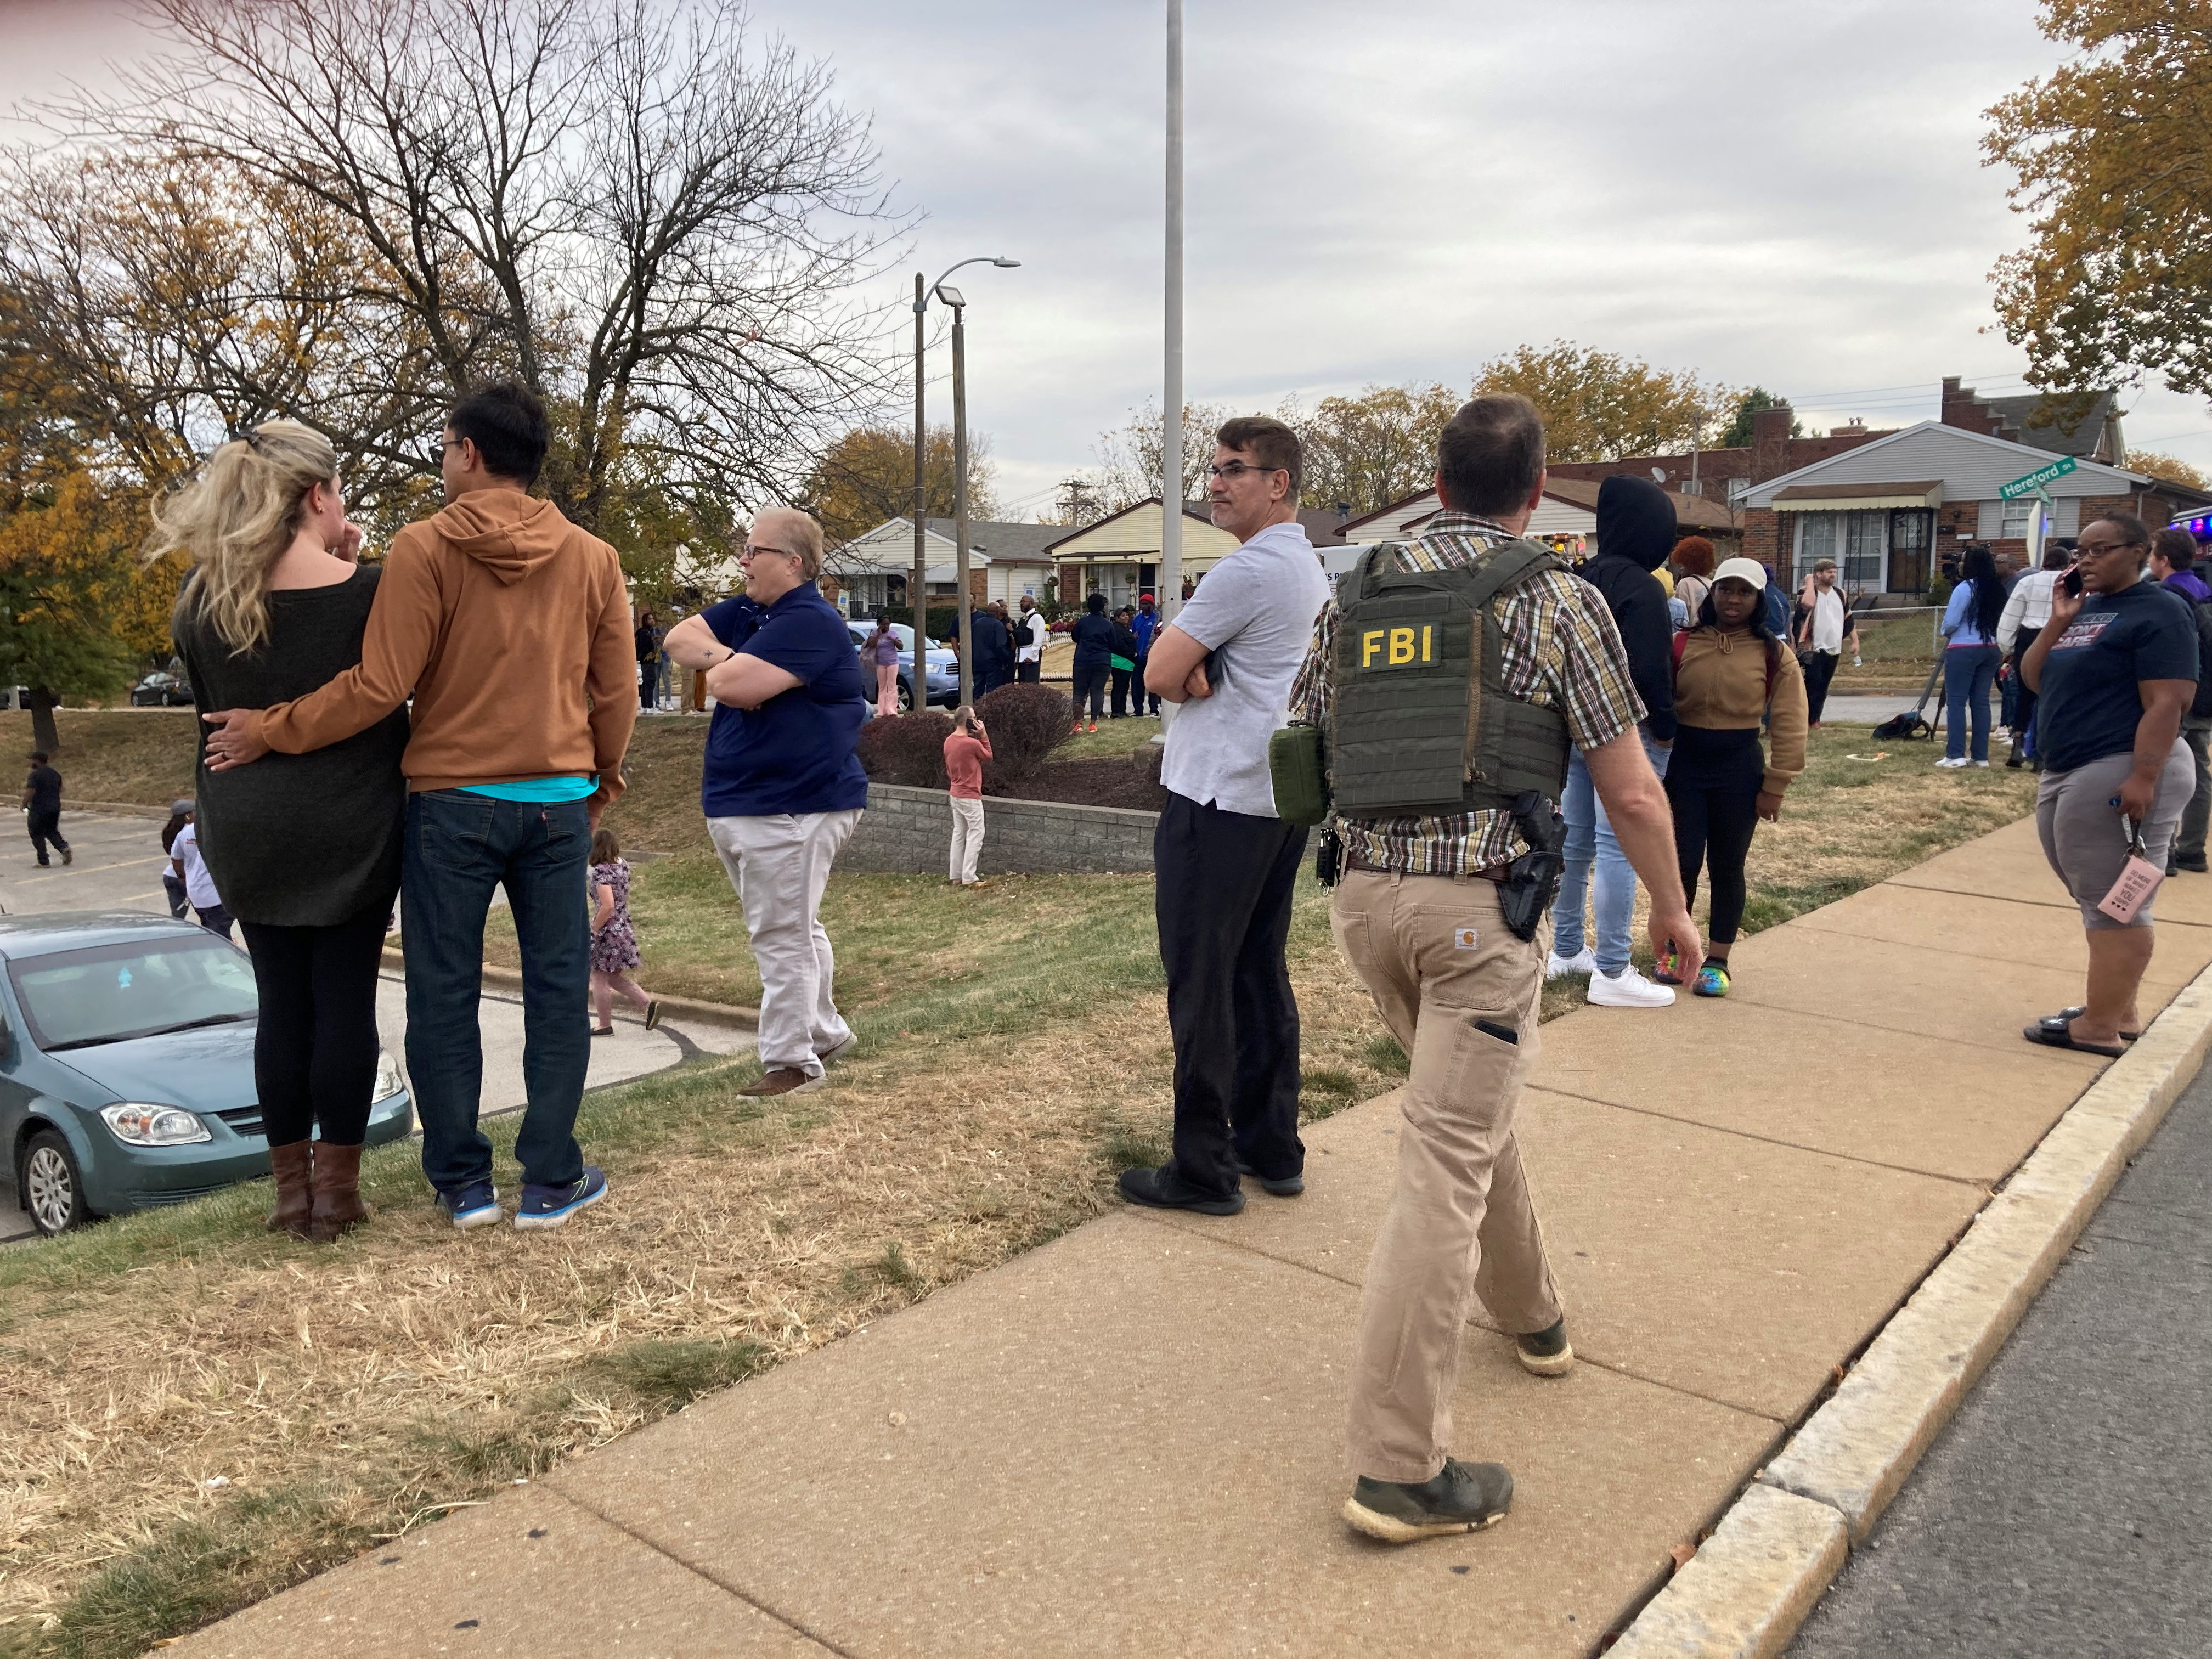 FILE PHOTO - People gather following a shooting at a high school, in St. Louis